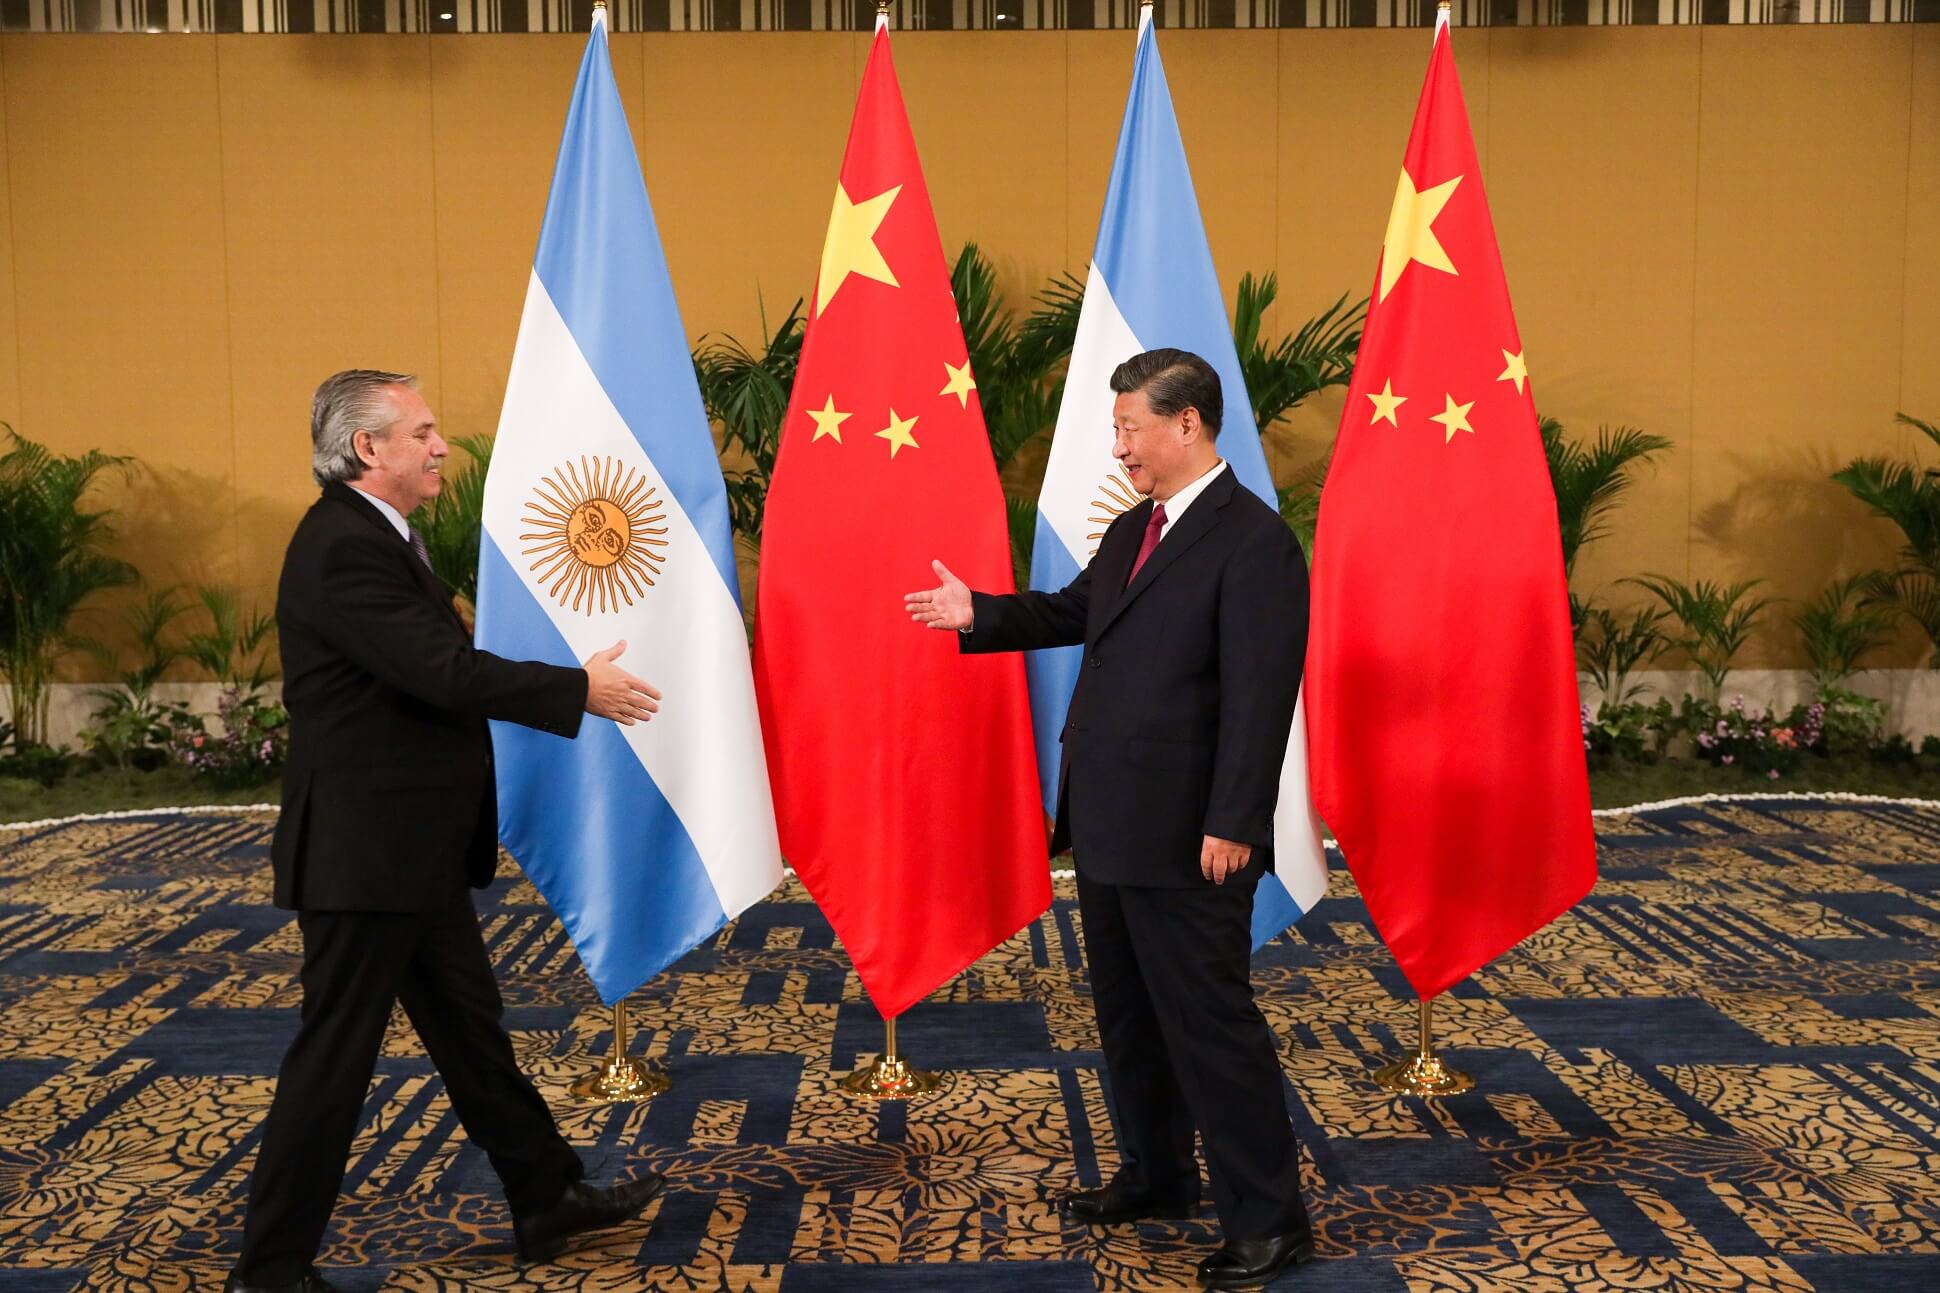 Argentine SMEs can access a training program to enter the Chinese market